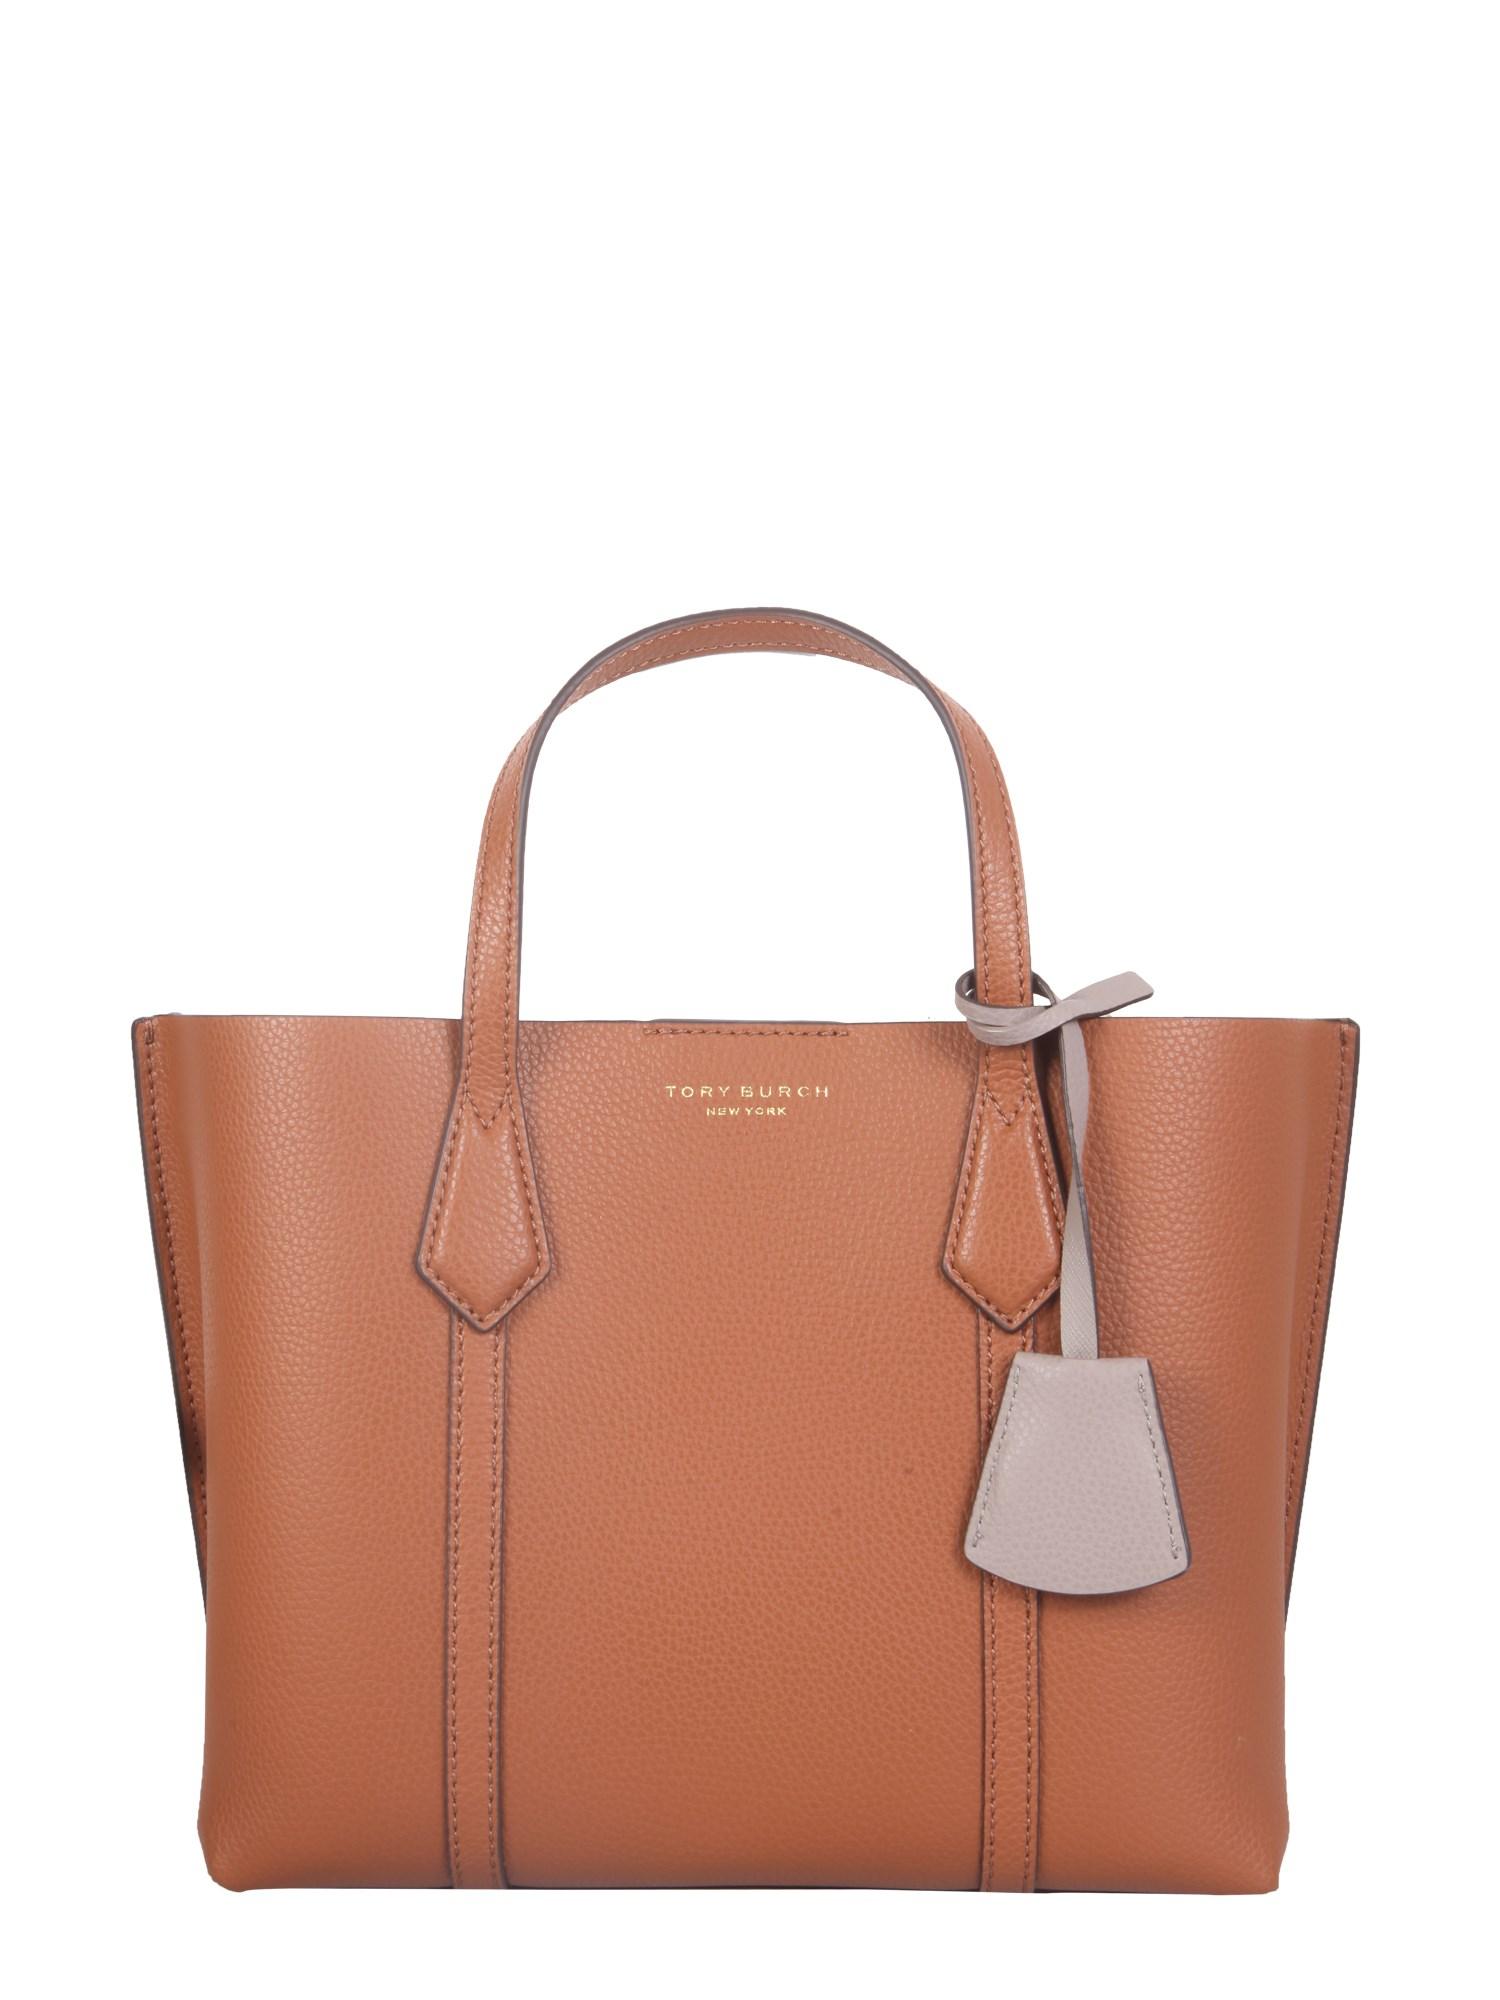 Tory Burch Small Perry Tote Bag in Brown | Lyst